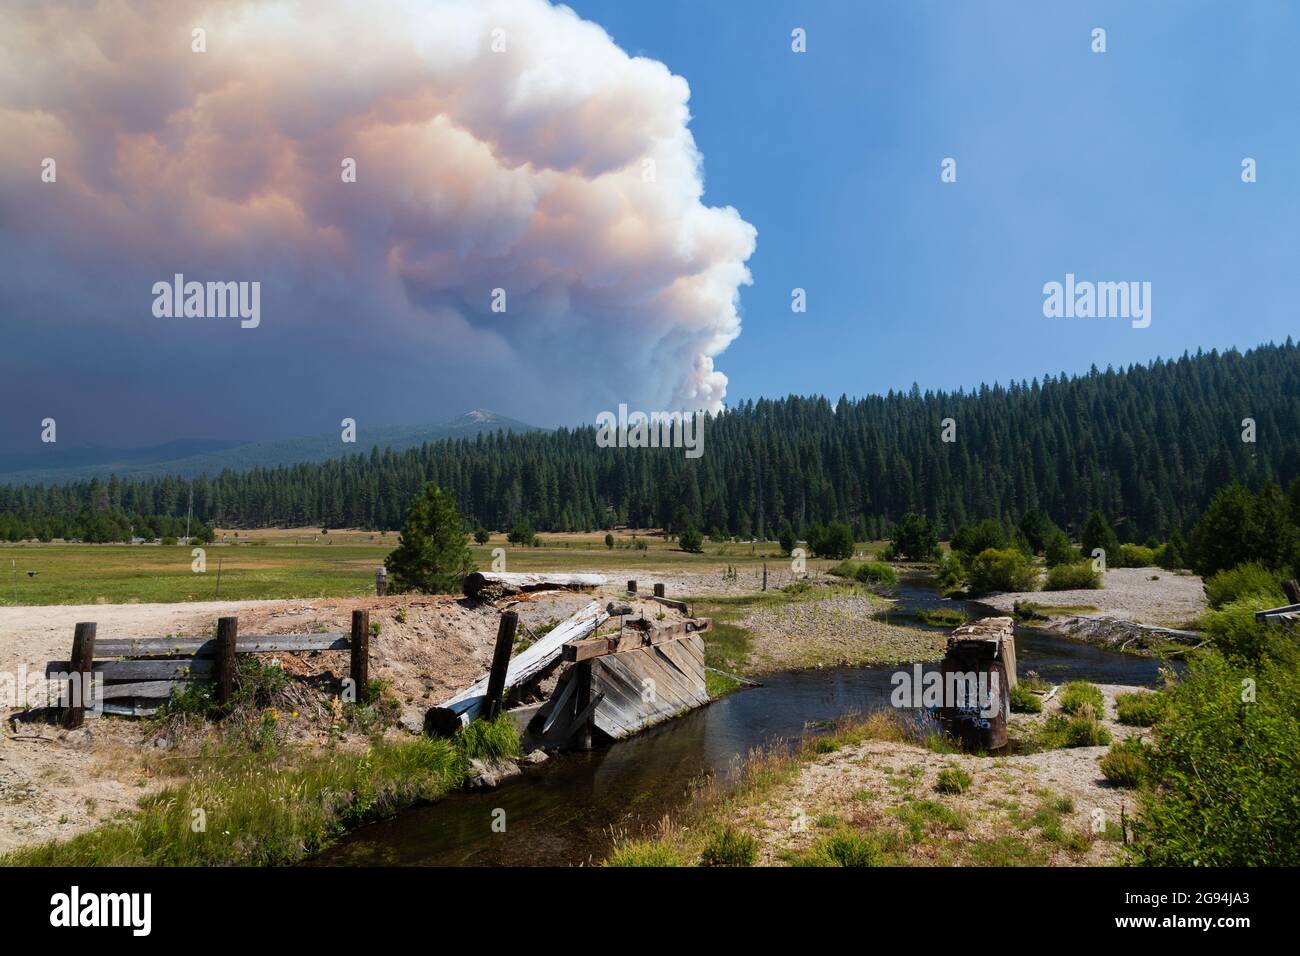 The plume from the Dixie Fire in Plumas County, California billowing smoke as seen from nearby Deer Creek on July 22, 2021 Stock Photo